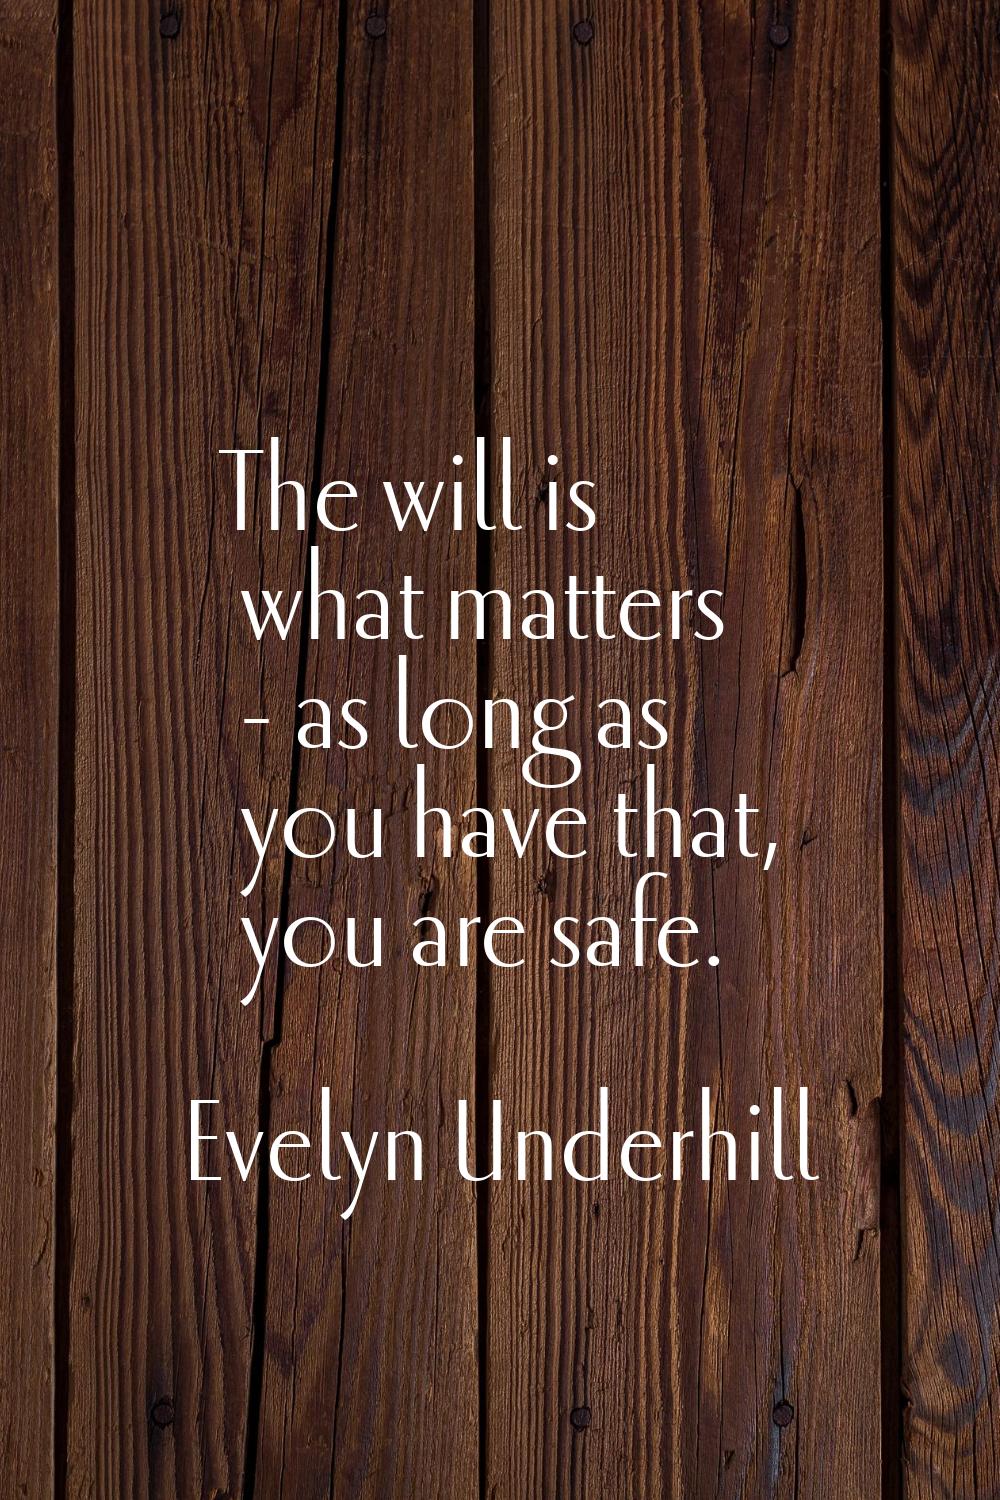 The will is what matters - as long as you have that, you are safe.